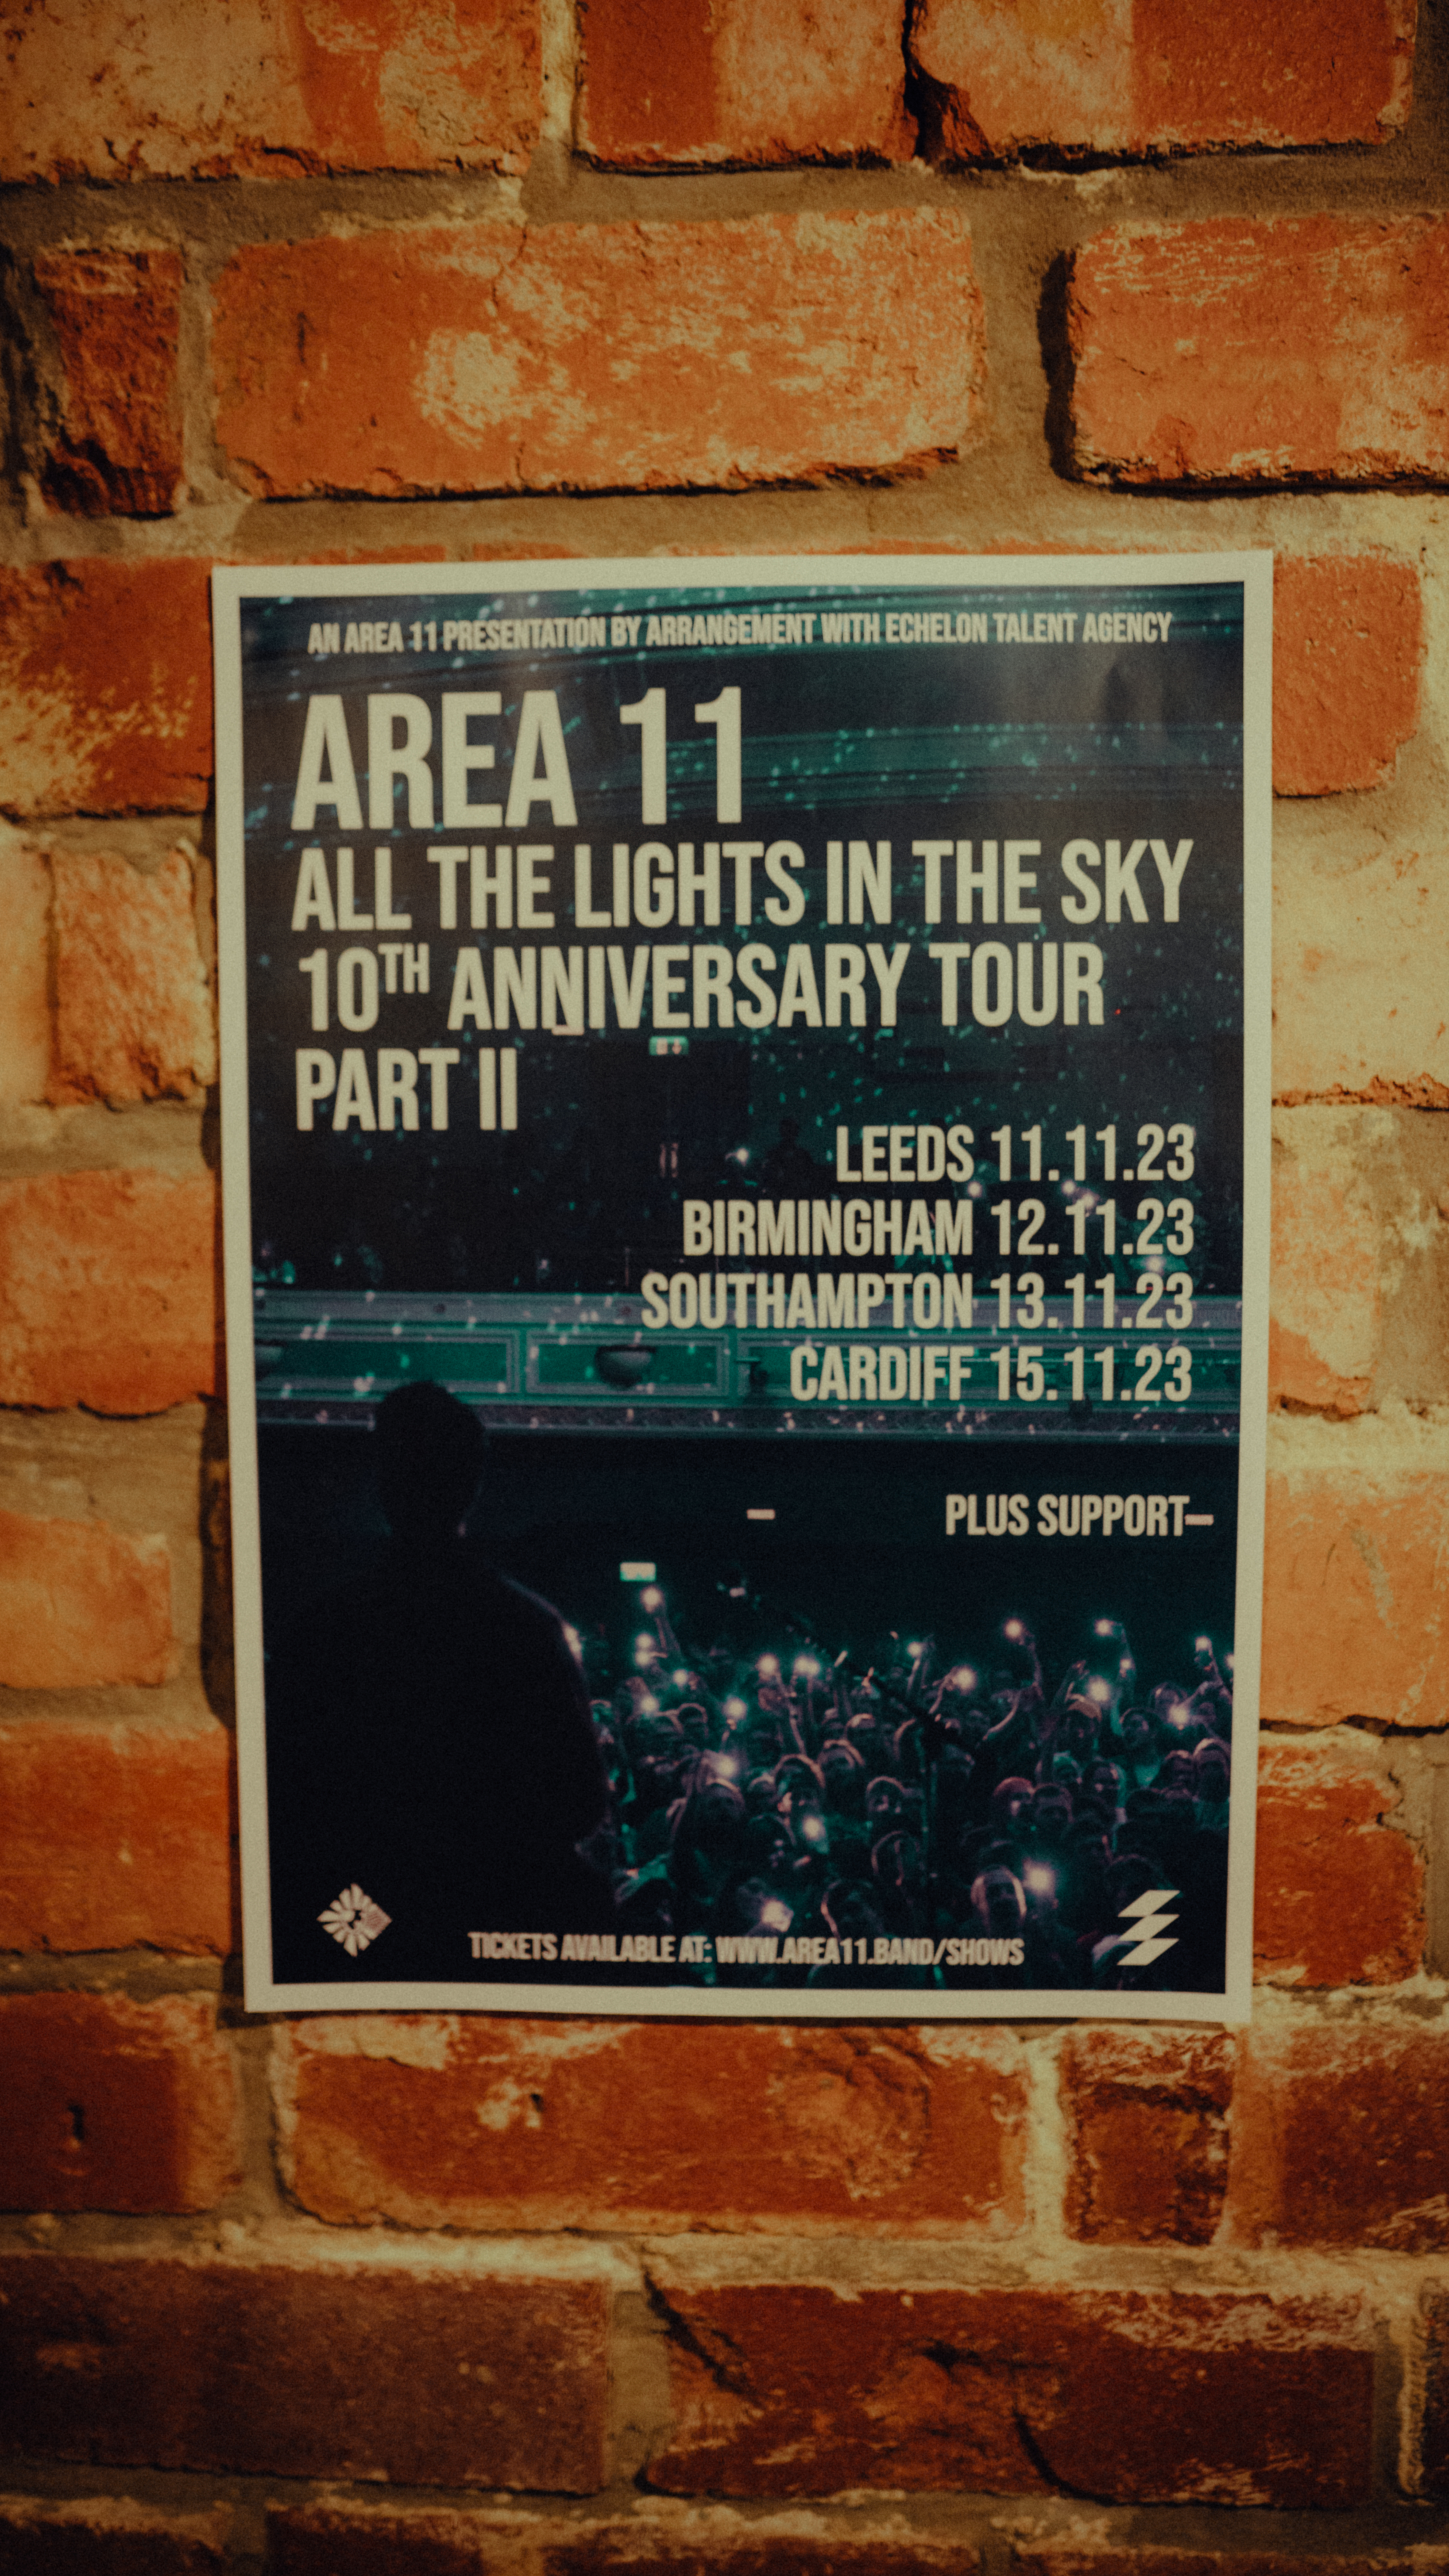 'All The Lights In The Sky 10th Anniversary Tour Pt II' - Poster - Area 11